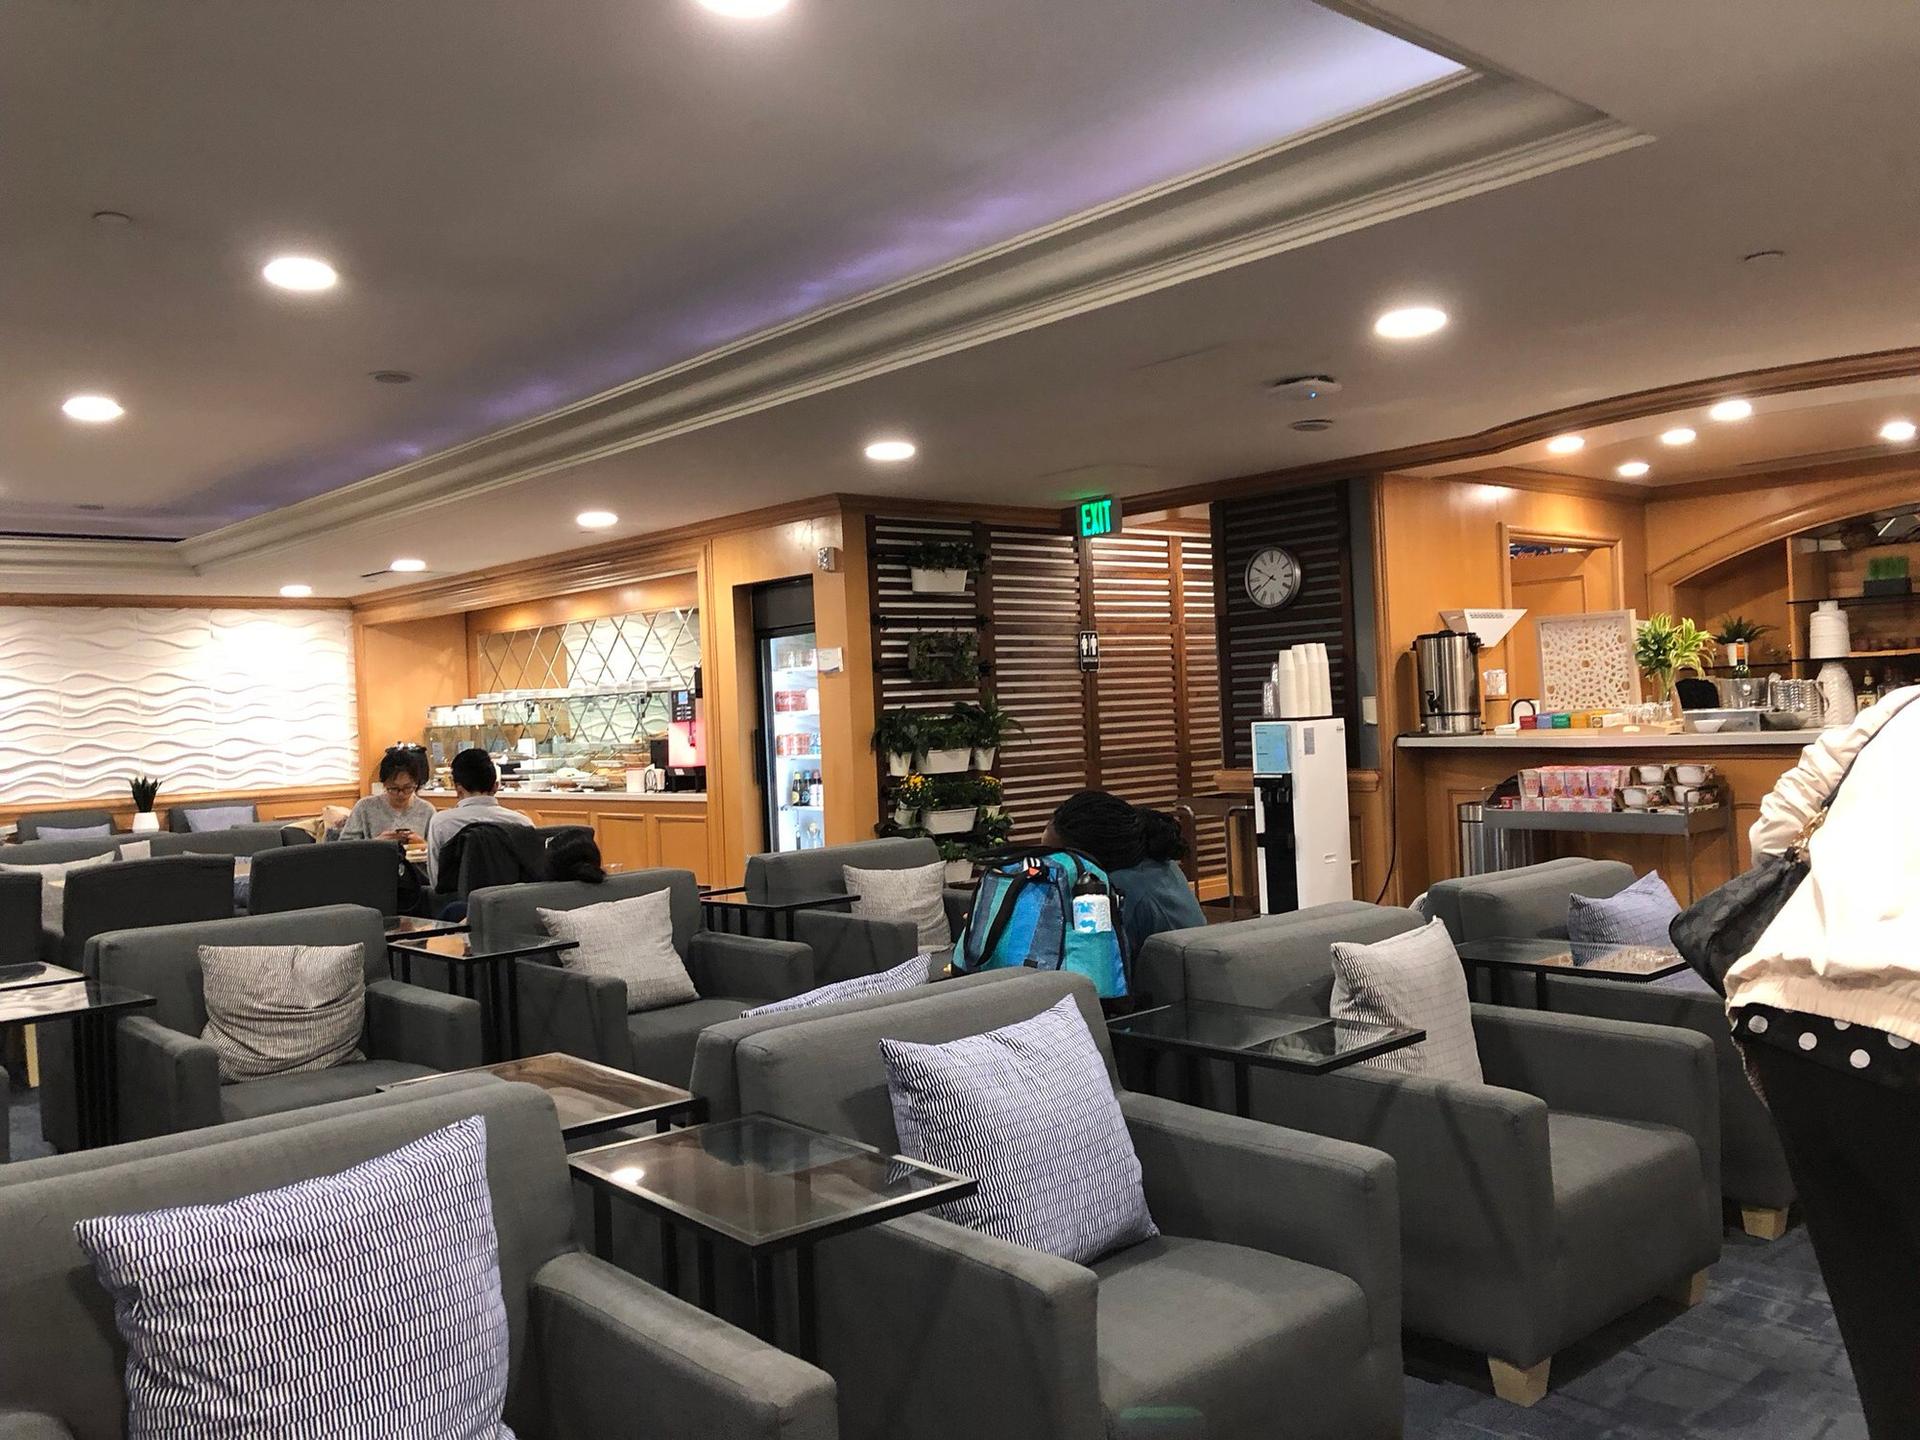 China Airlines Dynasty Lounge image 14 of 34